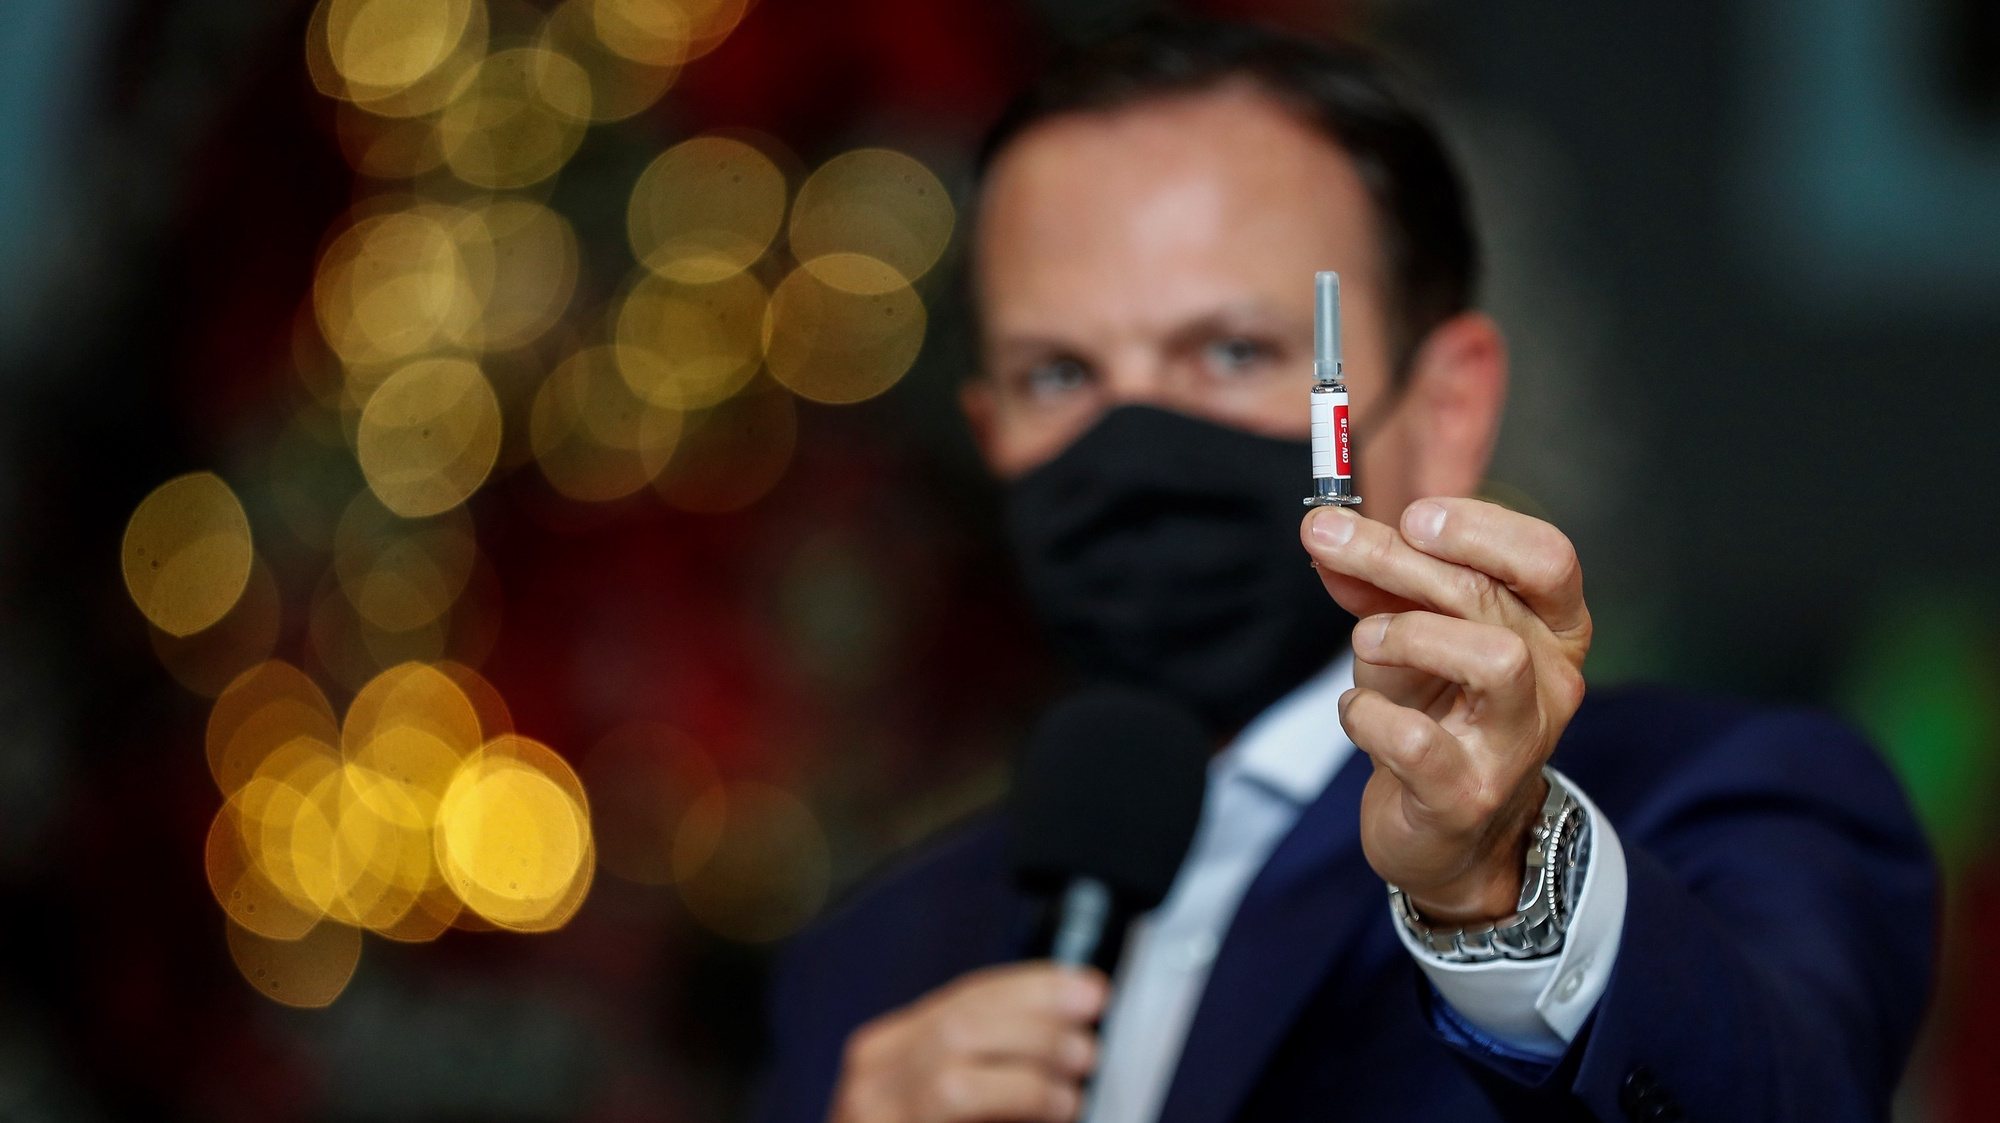 epa08868899 The Governor of Sao Paulo, Joao Doria, shows a vial of &#039;Coronavac&#039; during a press conference about his vaccination program against covid-19, in Sao Paulo, Brazil, 07 December 2020. Doria announced this Monday at the Palacio de los Bandeirantes, in Sao Paulo, that on 25 January 2021 the vaccination against covid-19 will begin in that state of Brazil, the most populous in the country, with some 46 million inhabitants and epicenter of the pandemic in the South American giant. As long as it gets the go-ahead from the Brazilian health regulator, health professionals, people over 75 years of age and the indigenous and quilombola population will be the first to receive the &#039;Coronavac&#039;.  EPA/Sebastiao Moreira